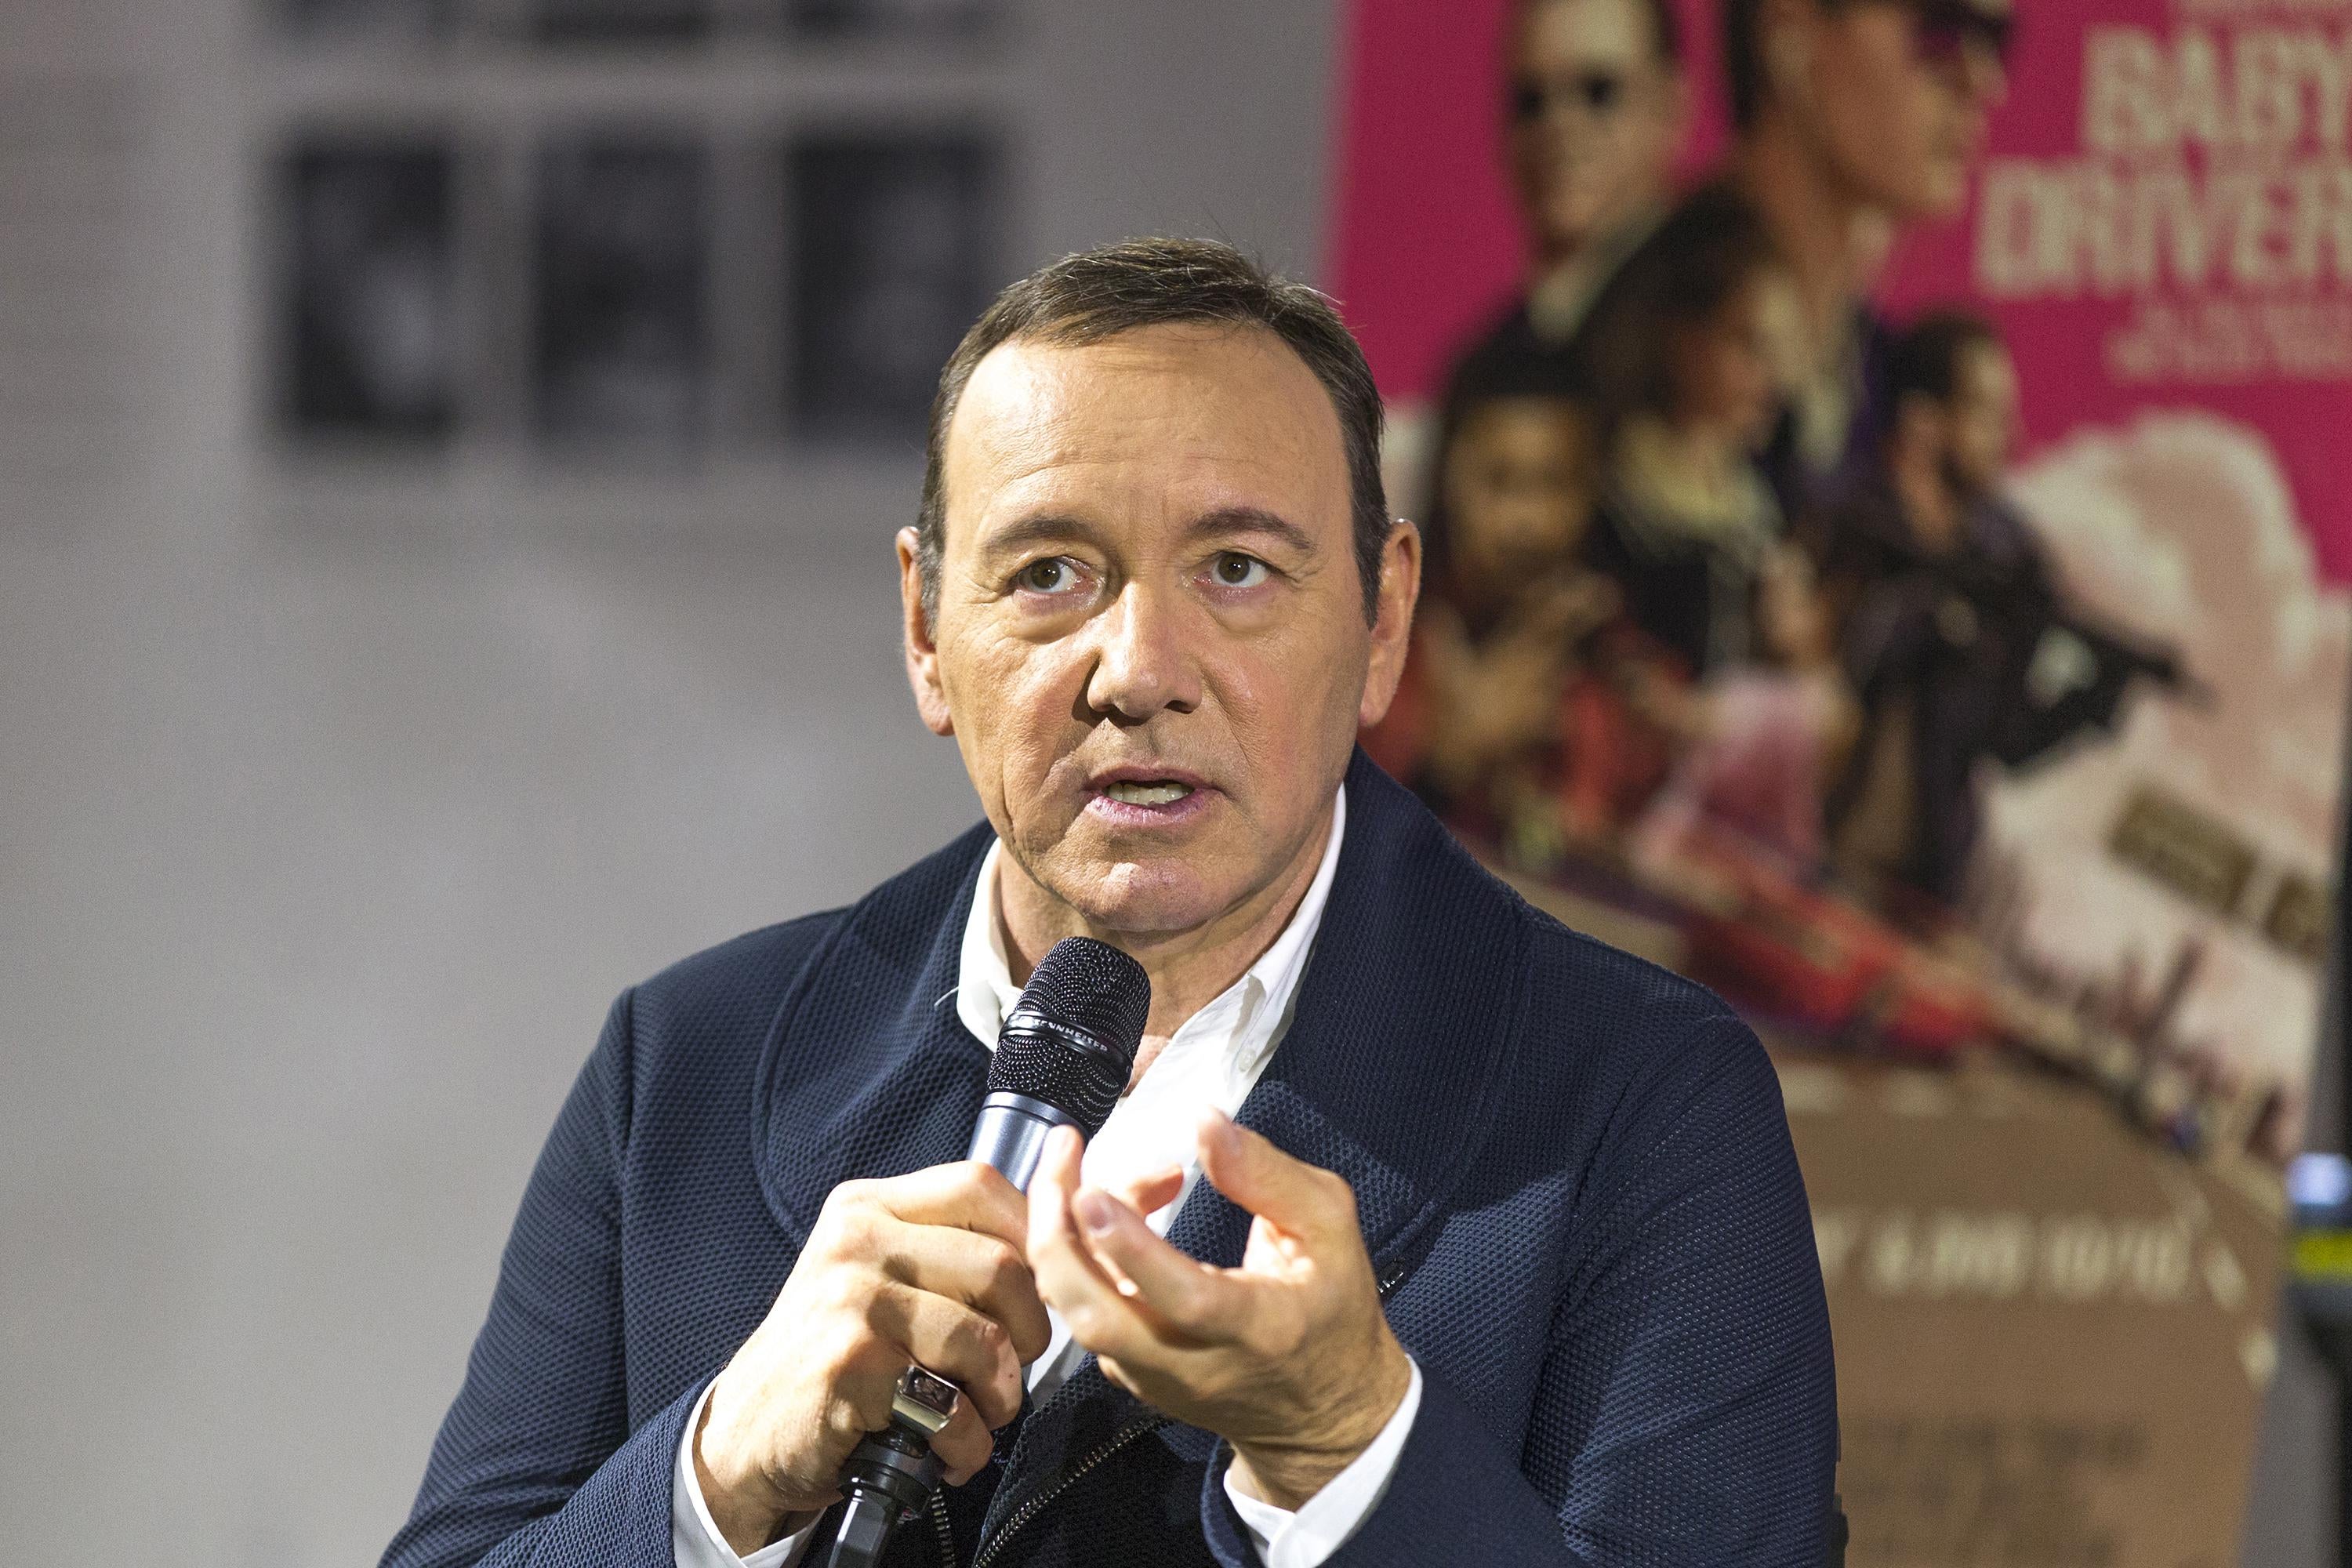 Kevin Spacey talks on stage at the Petersen Automotive Museum on October 4, 2017 in Los Angeles, California. 